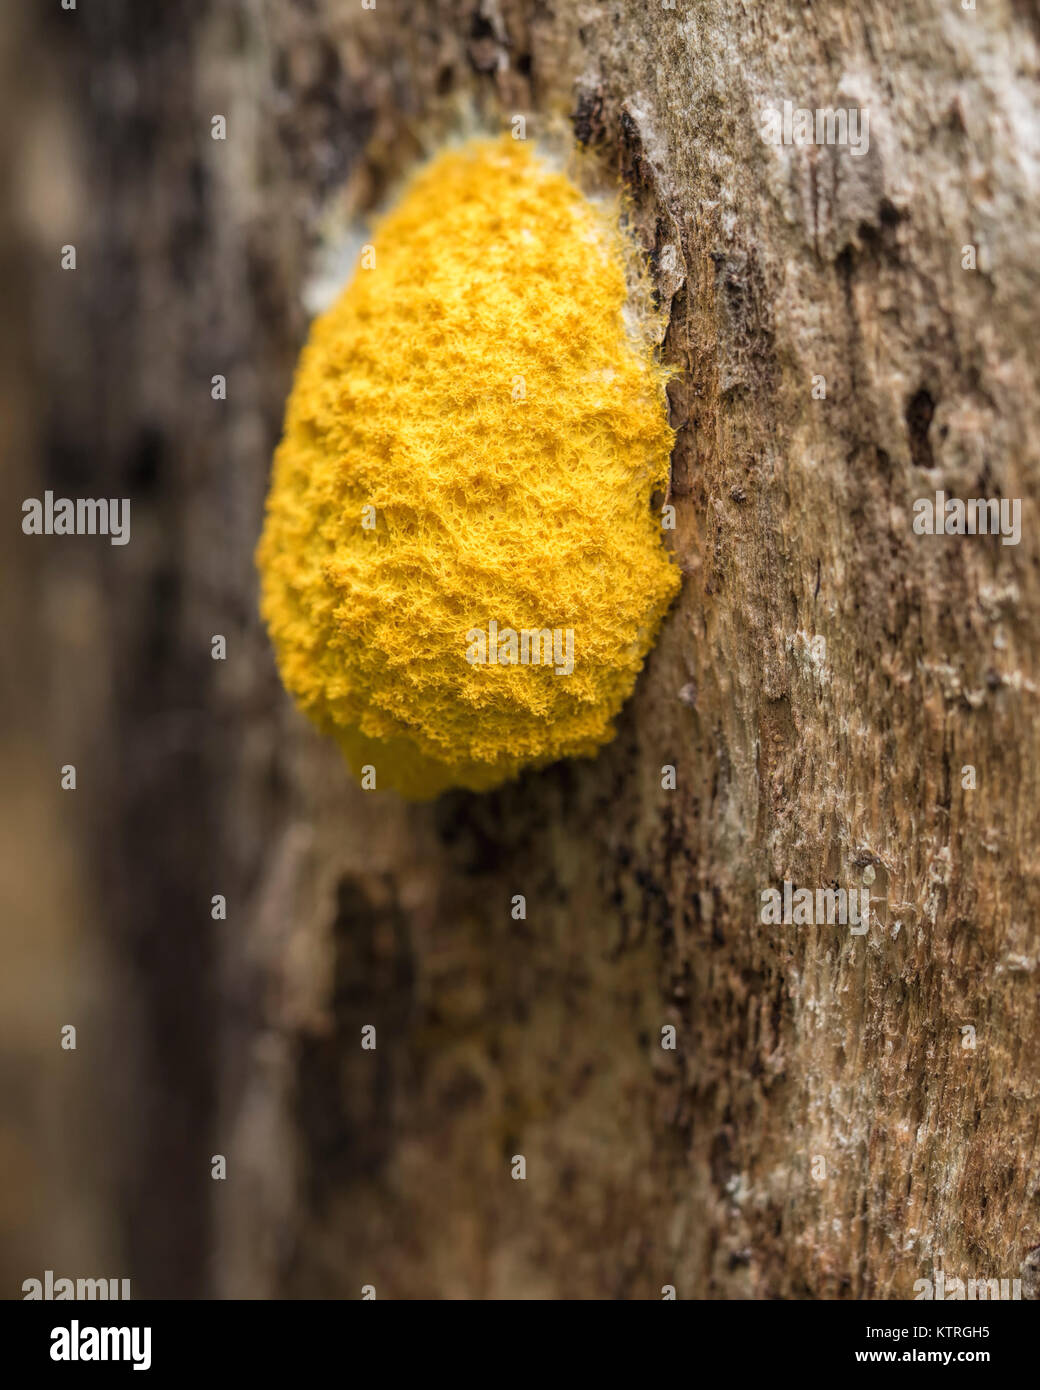 Dog Vomit Fungus or Dog Vomit slime mould (Fuligo septica) on the trunk of a rotten tree stump in woodland. Goatenbridge, Tipperary, Ireland. Stock Photo